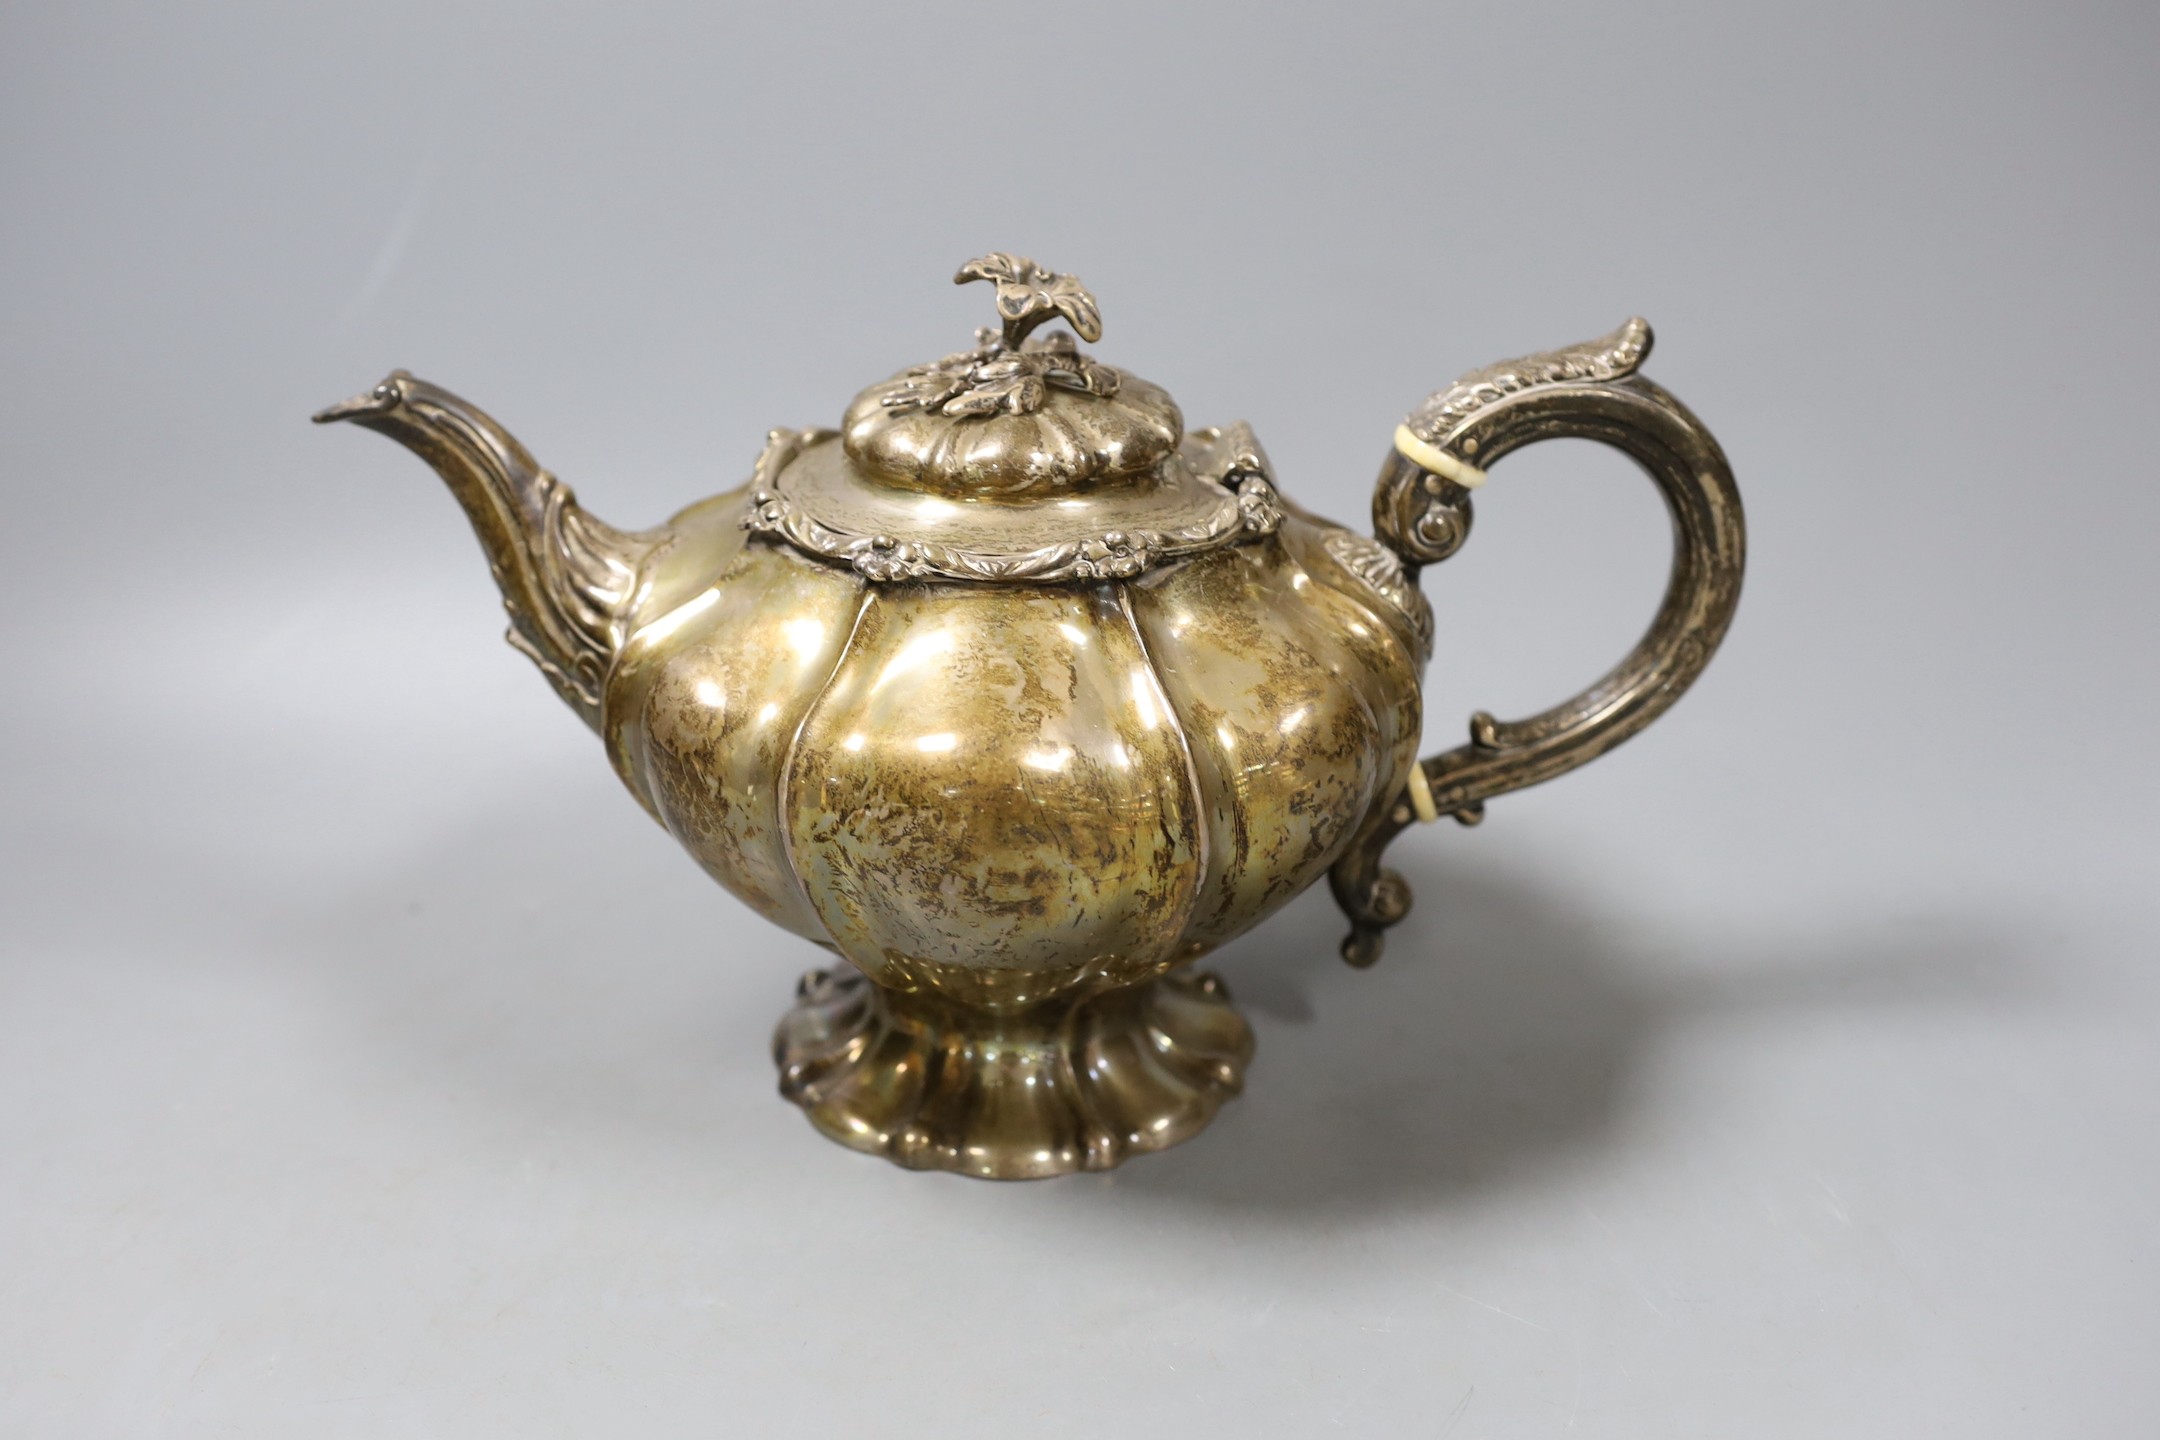 An early Victorian silver pedestal teapot by The Angells, London, 1840, 26.5oz.